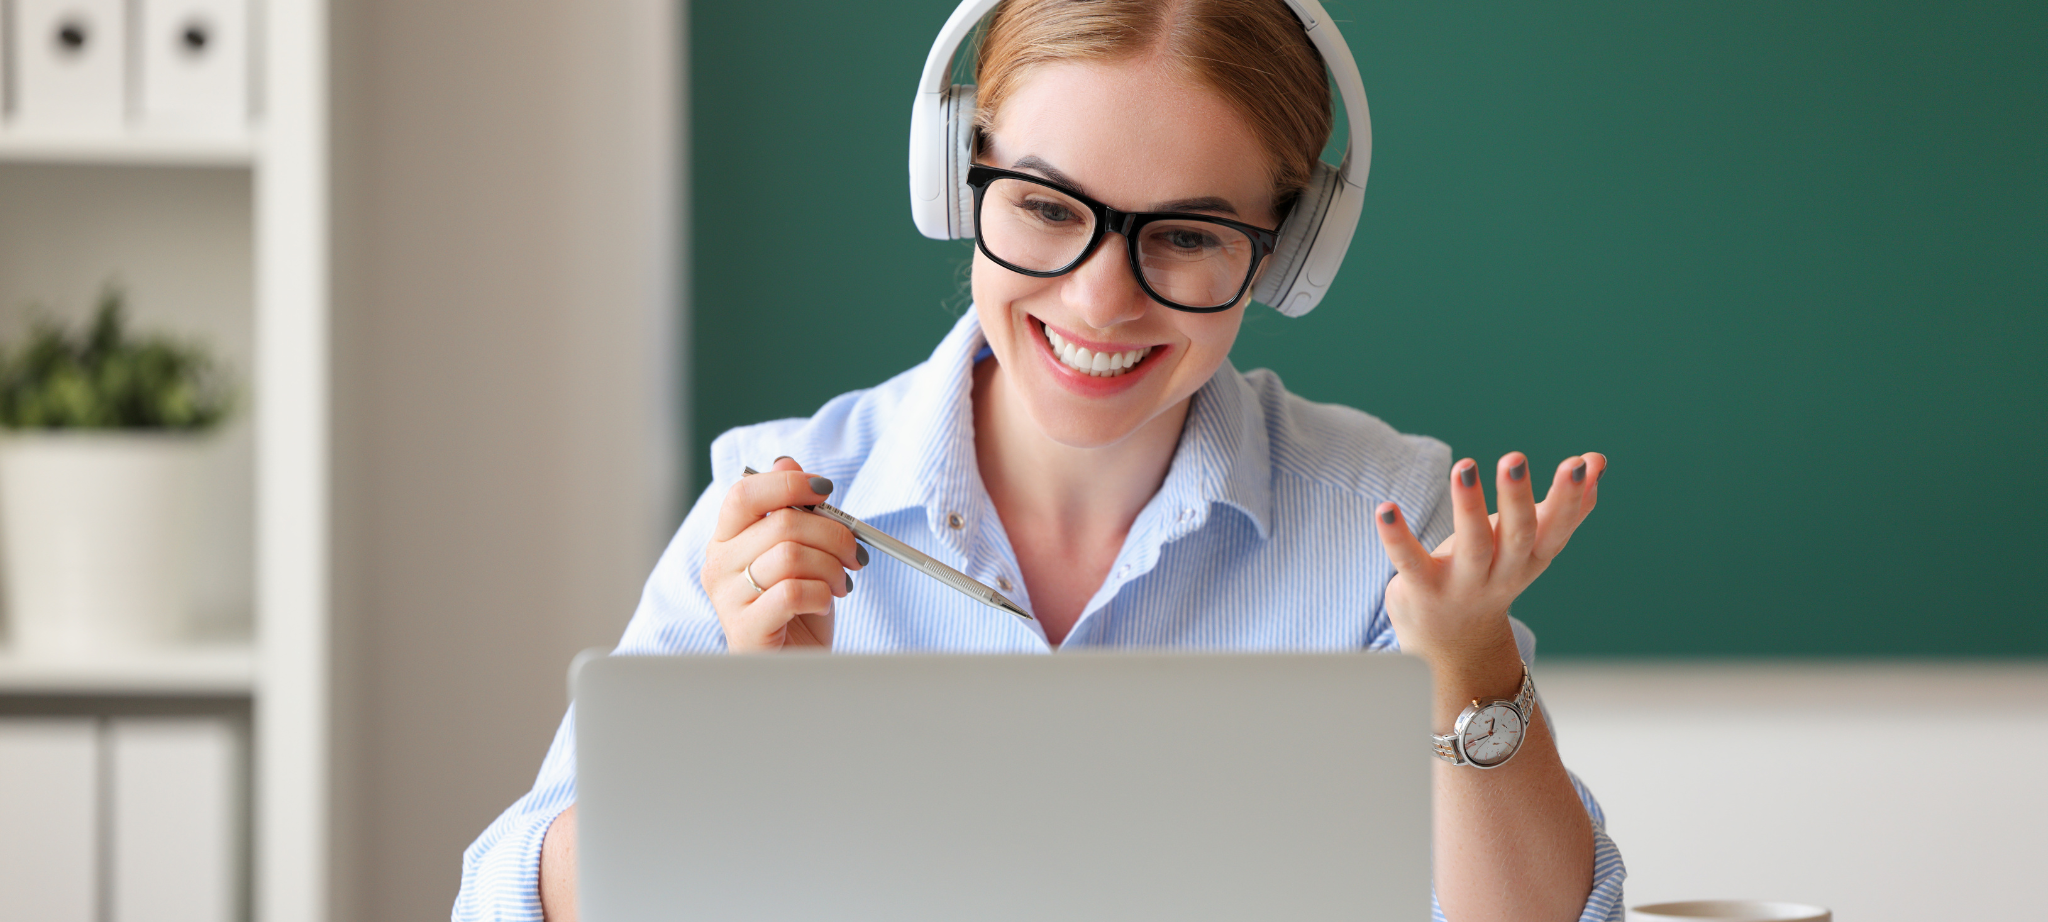 The 7 biggest differences between online learning vs classroom learning